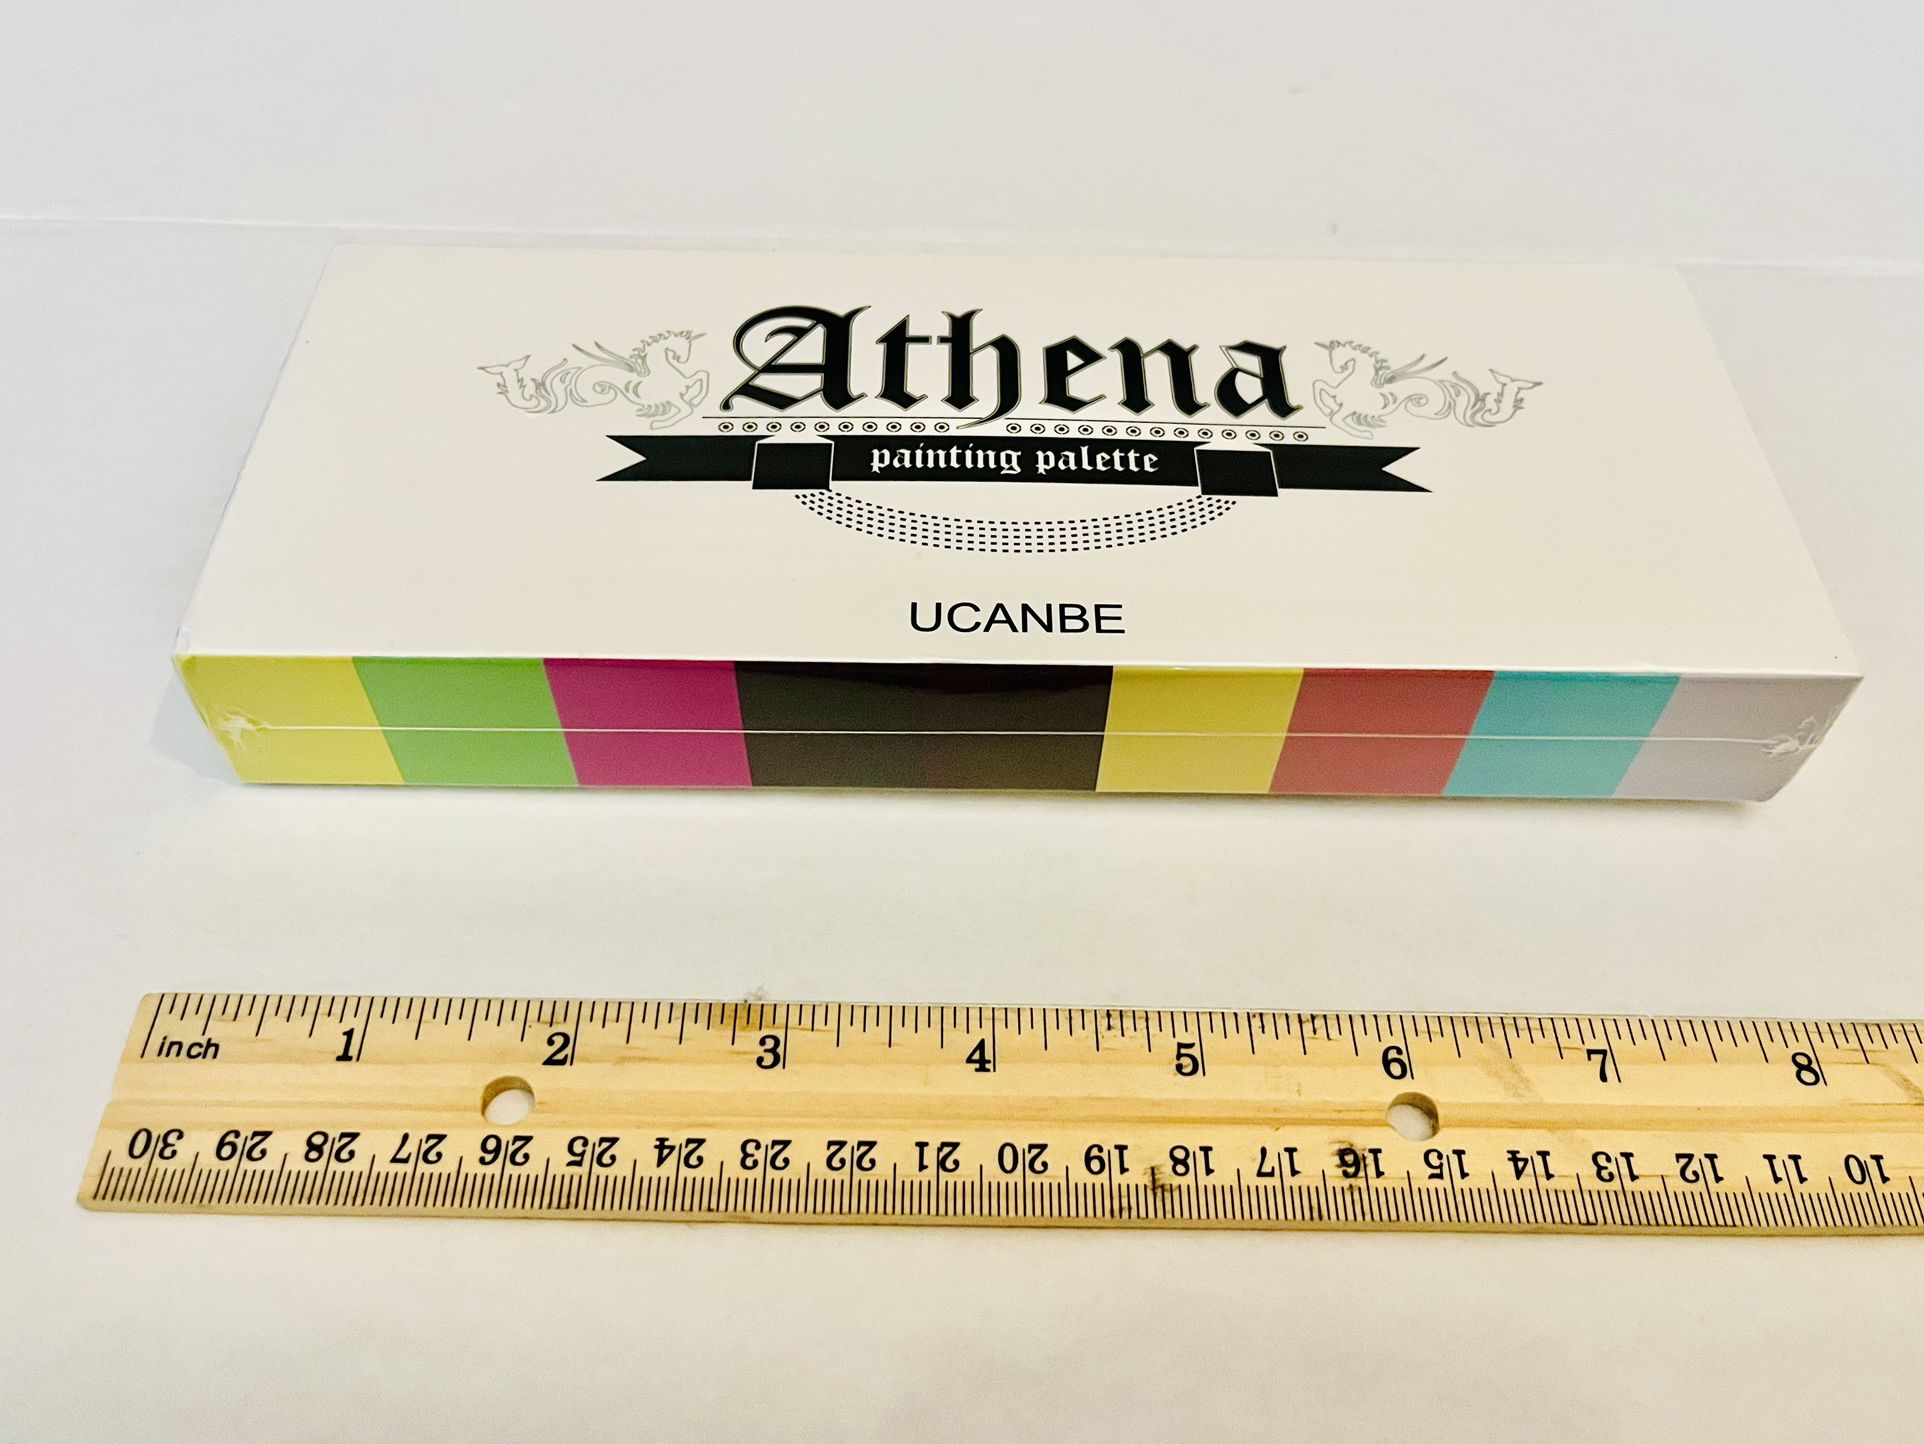 UCANBE - Athena - Painting Palette for Sale in Miami, FL - OfferUp